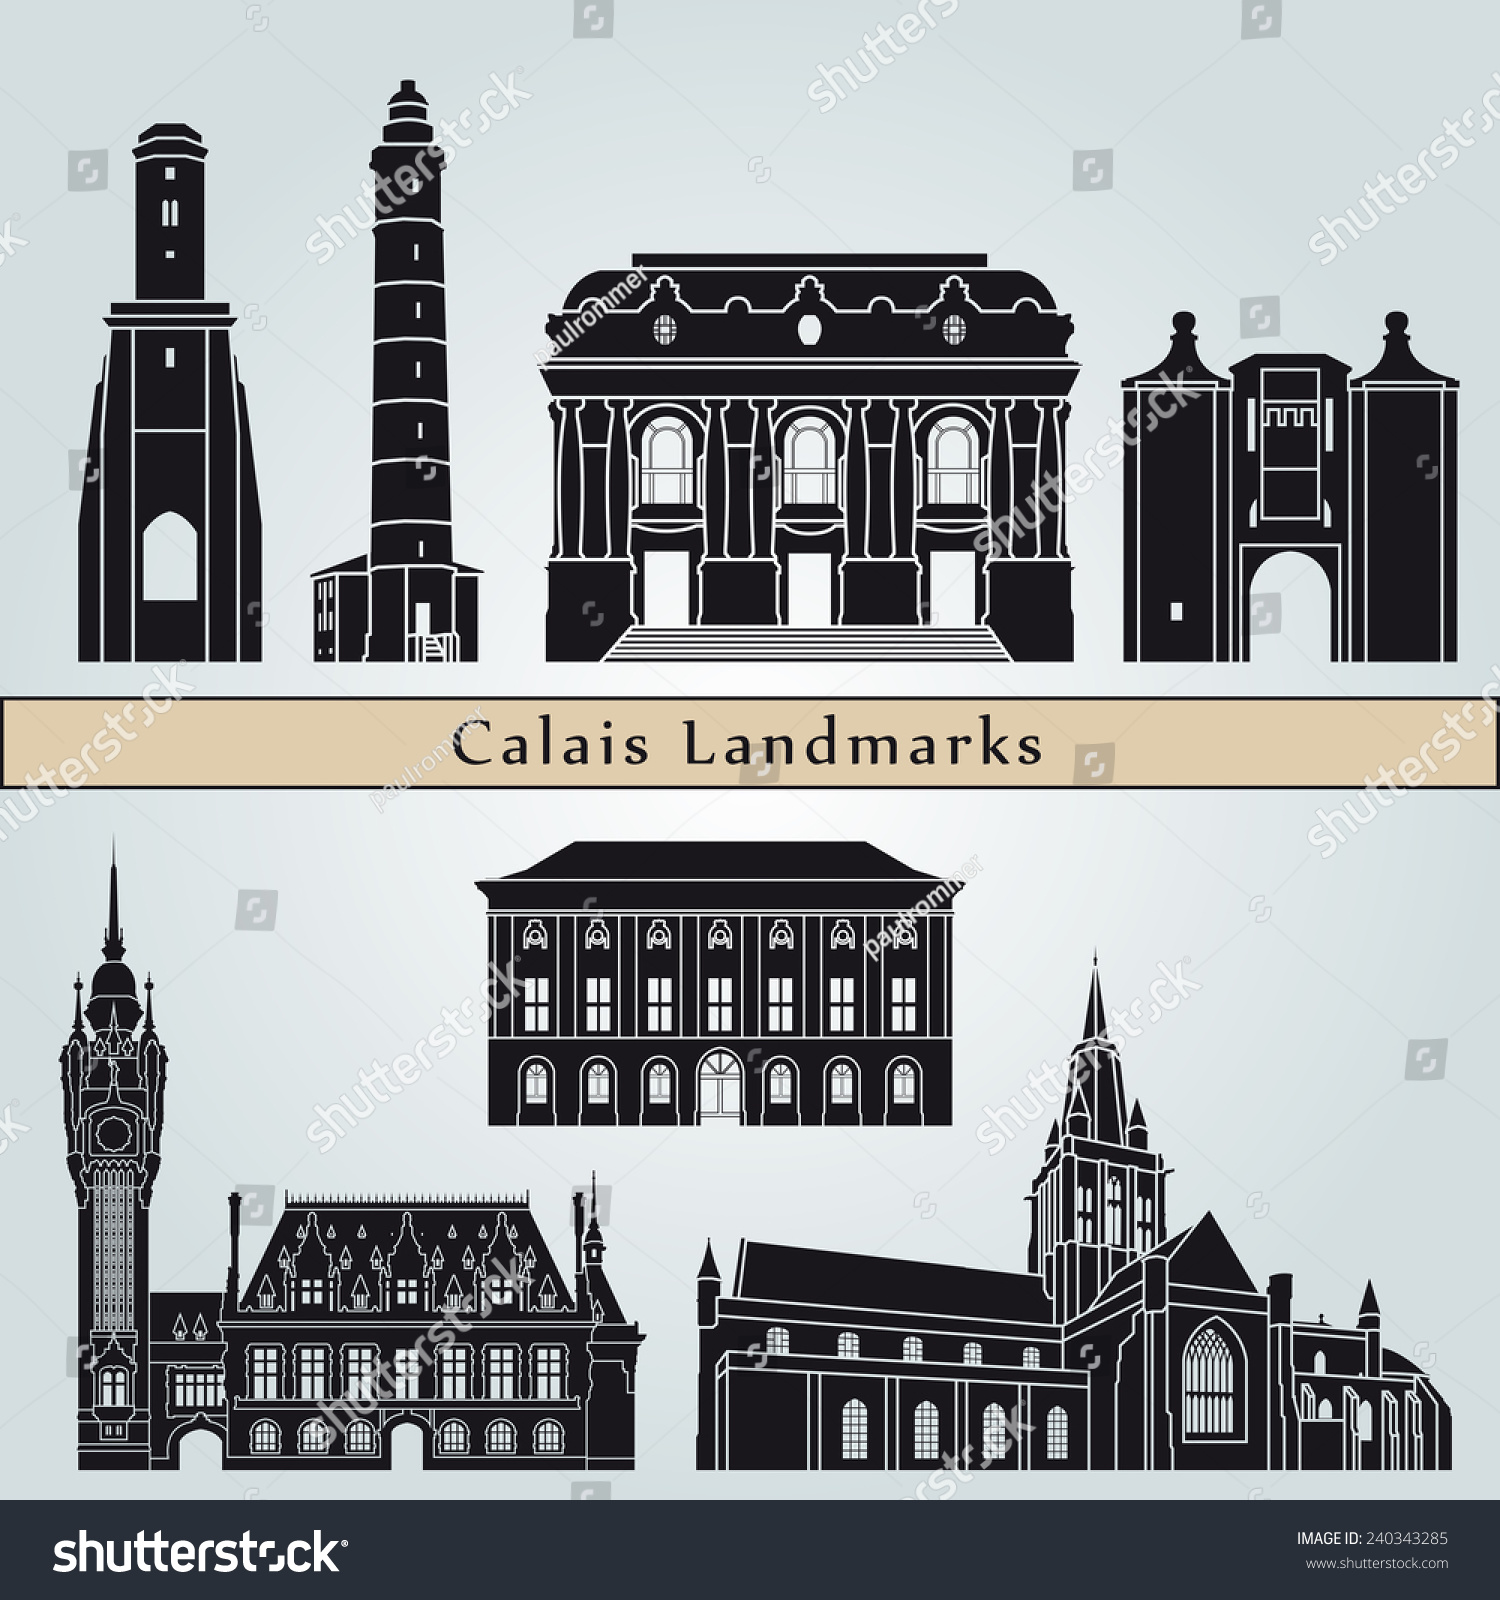 SVG of Calais landmarks and monuments isolated on blue background in editable vector file svg